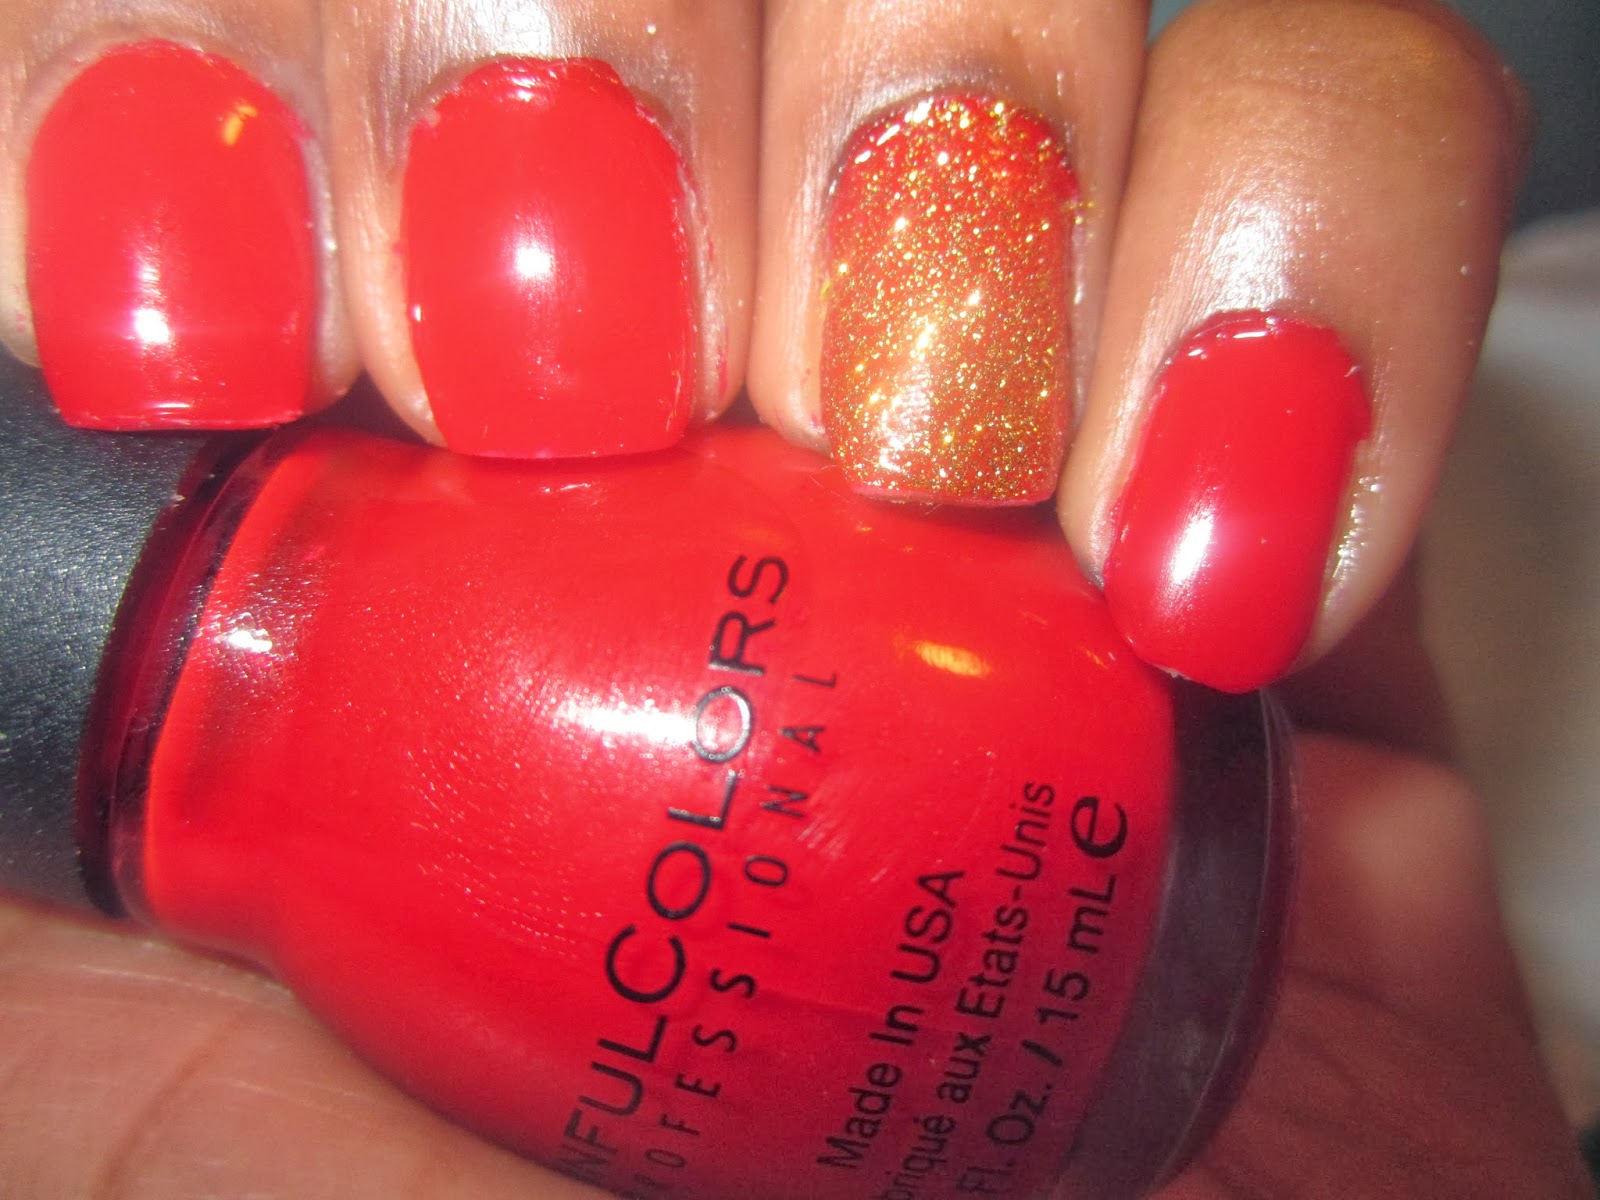 1. Sinful Colors Nail Polish in "Memorial Day Red" - wide 8